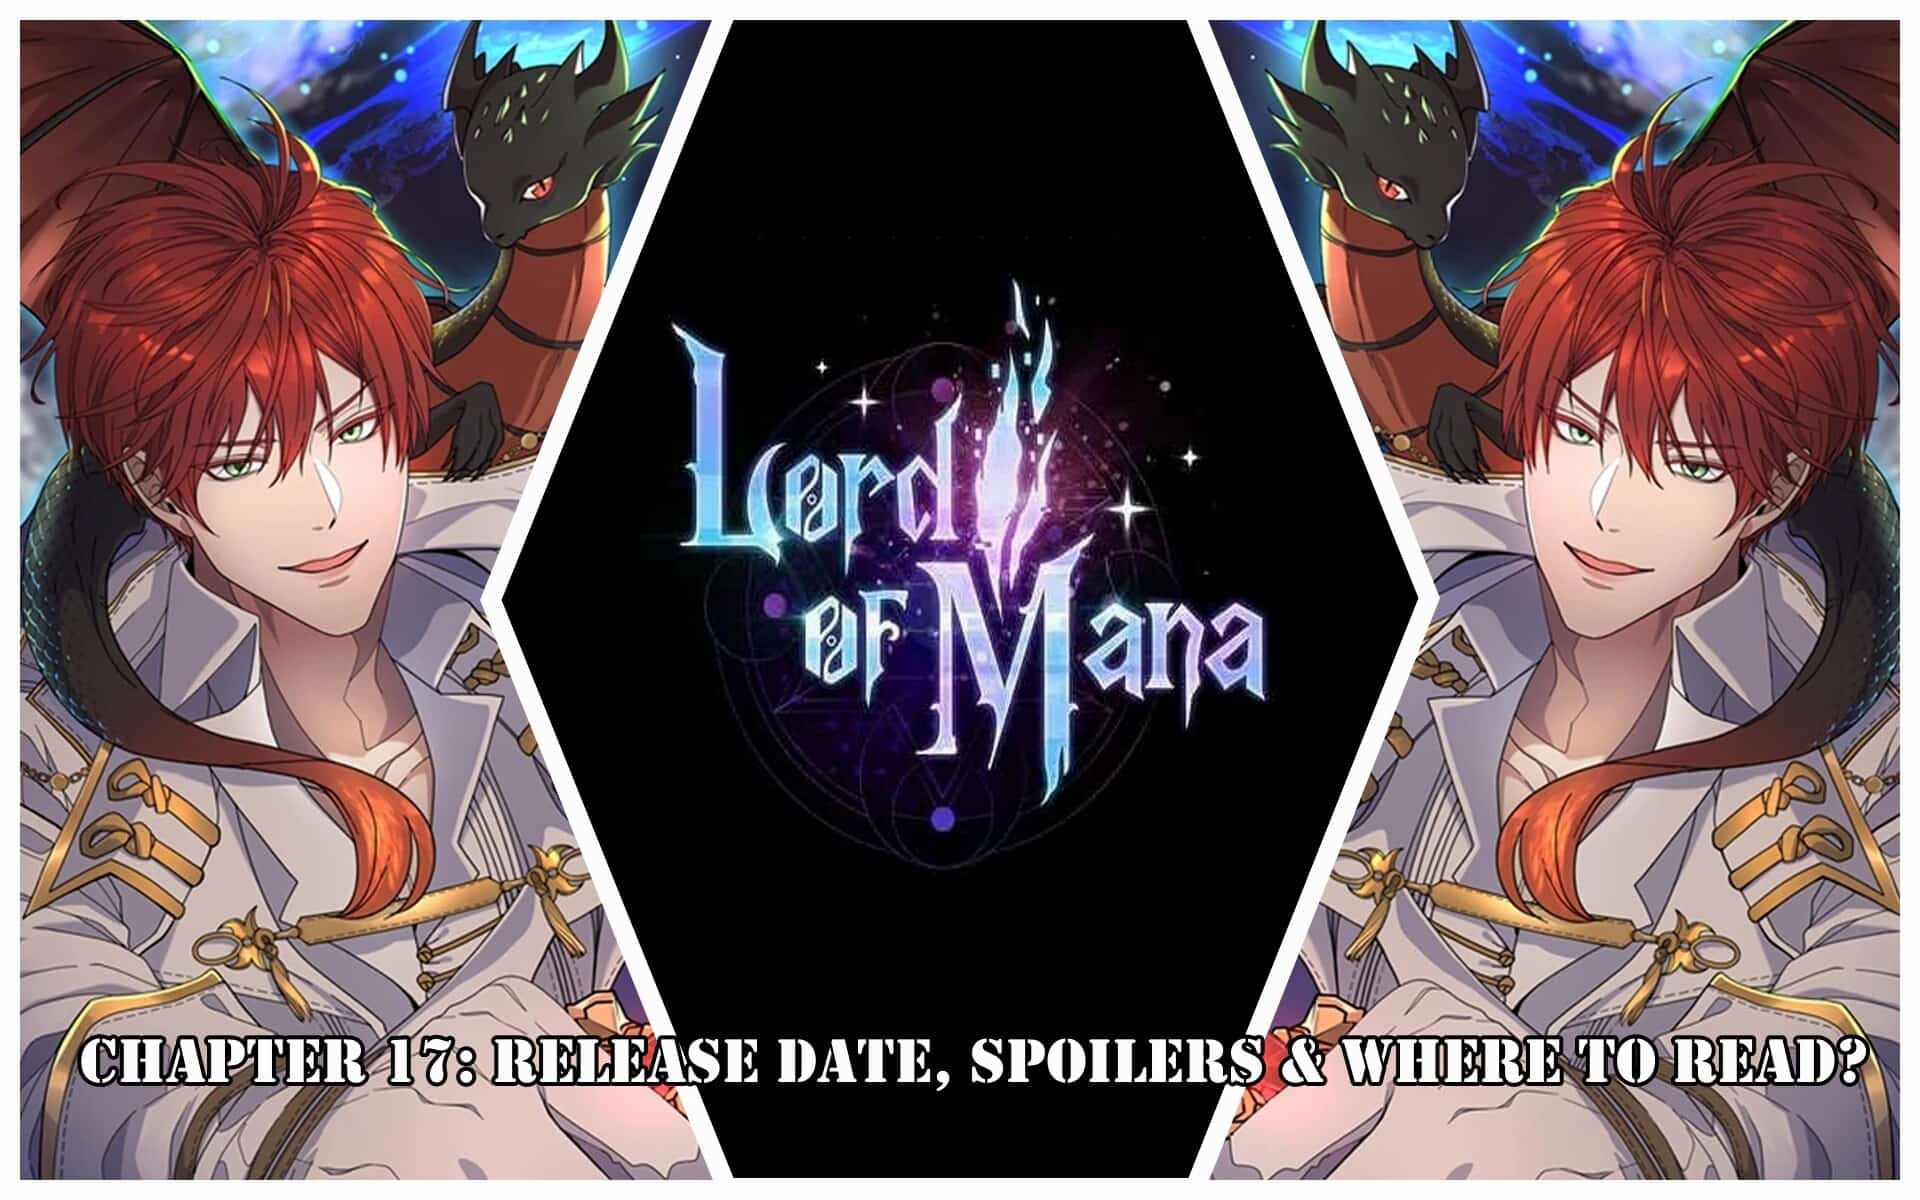 Lord Of Mana Chapter 17: Release Date, Spoilers & Where to Read?